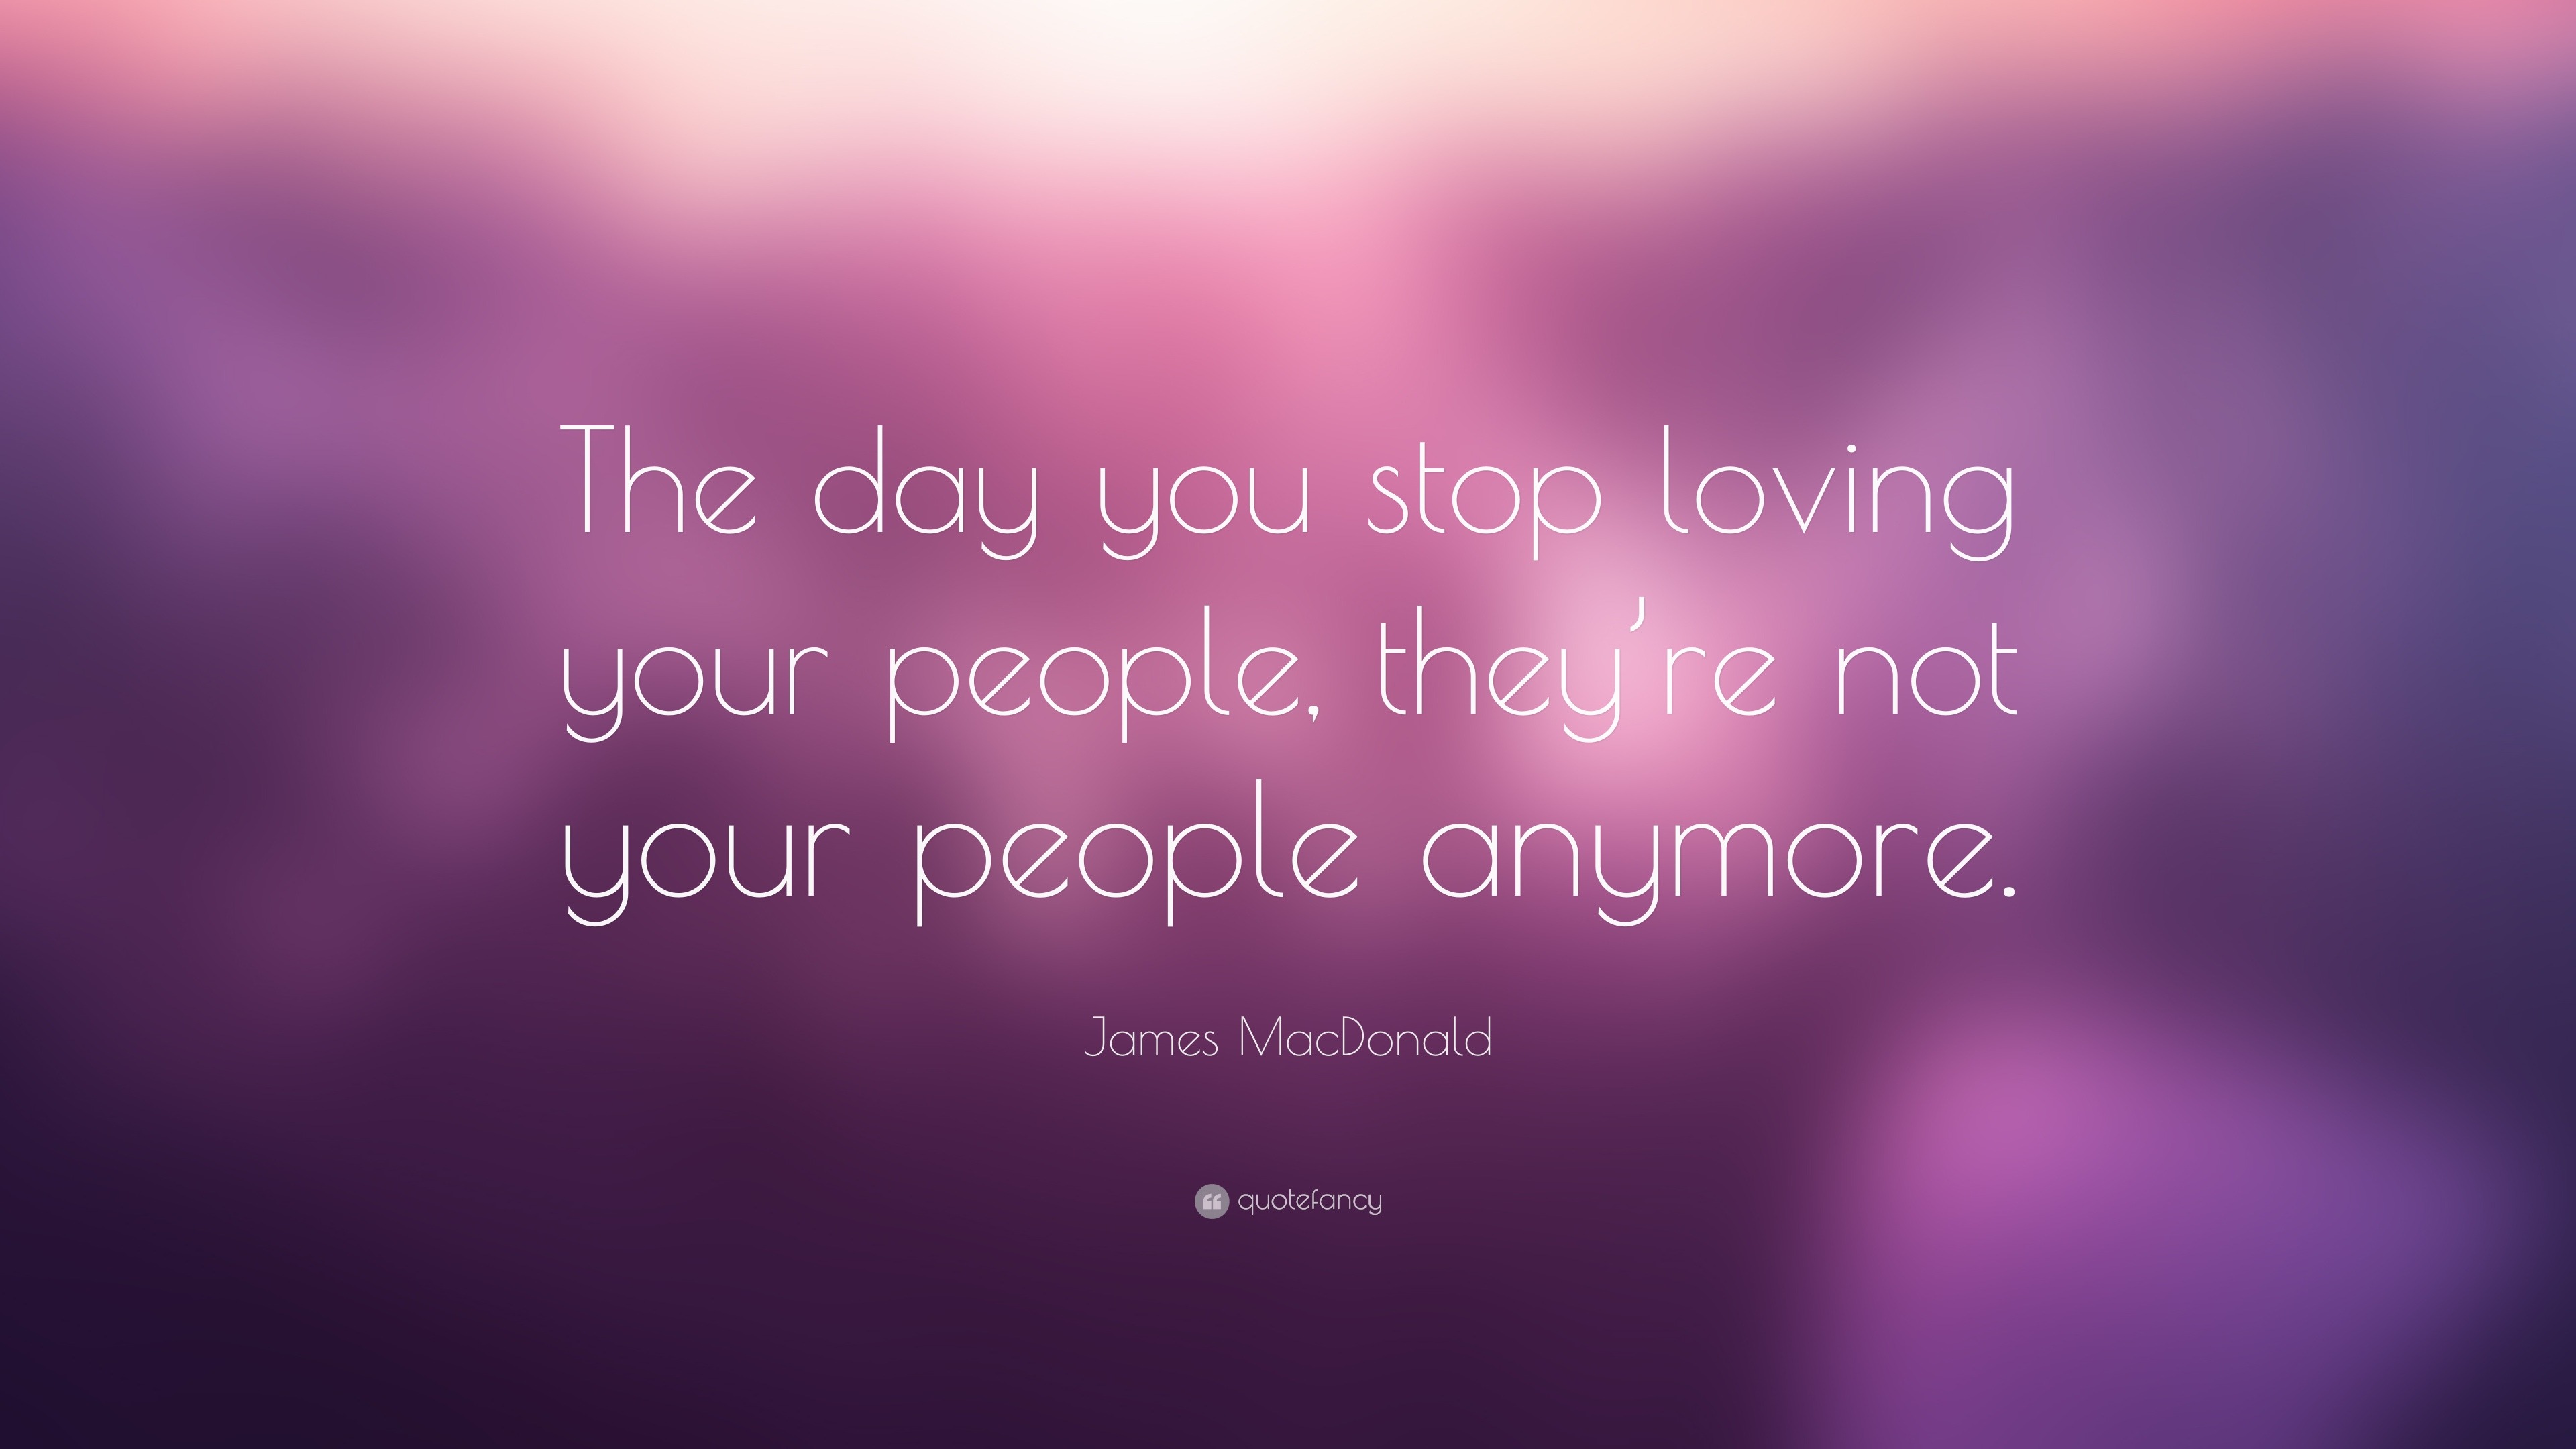 James MacDonald Quote “The day you stop loving your people they re